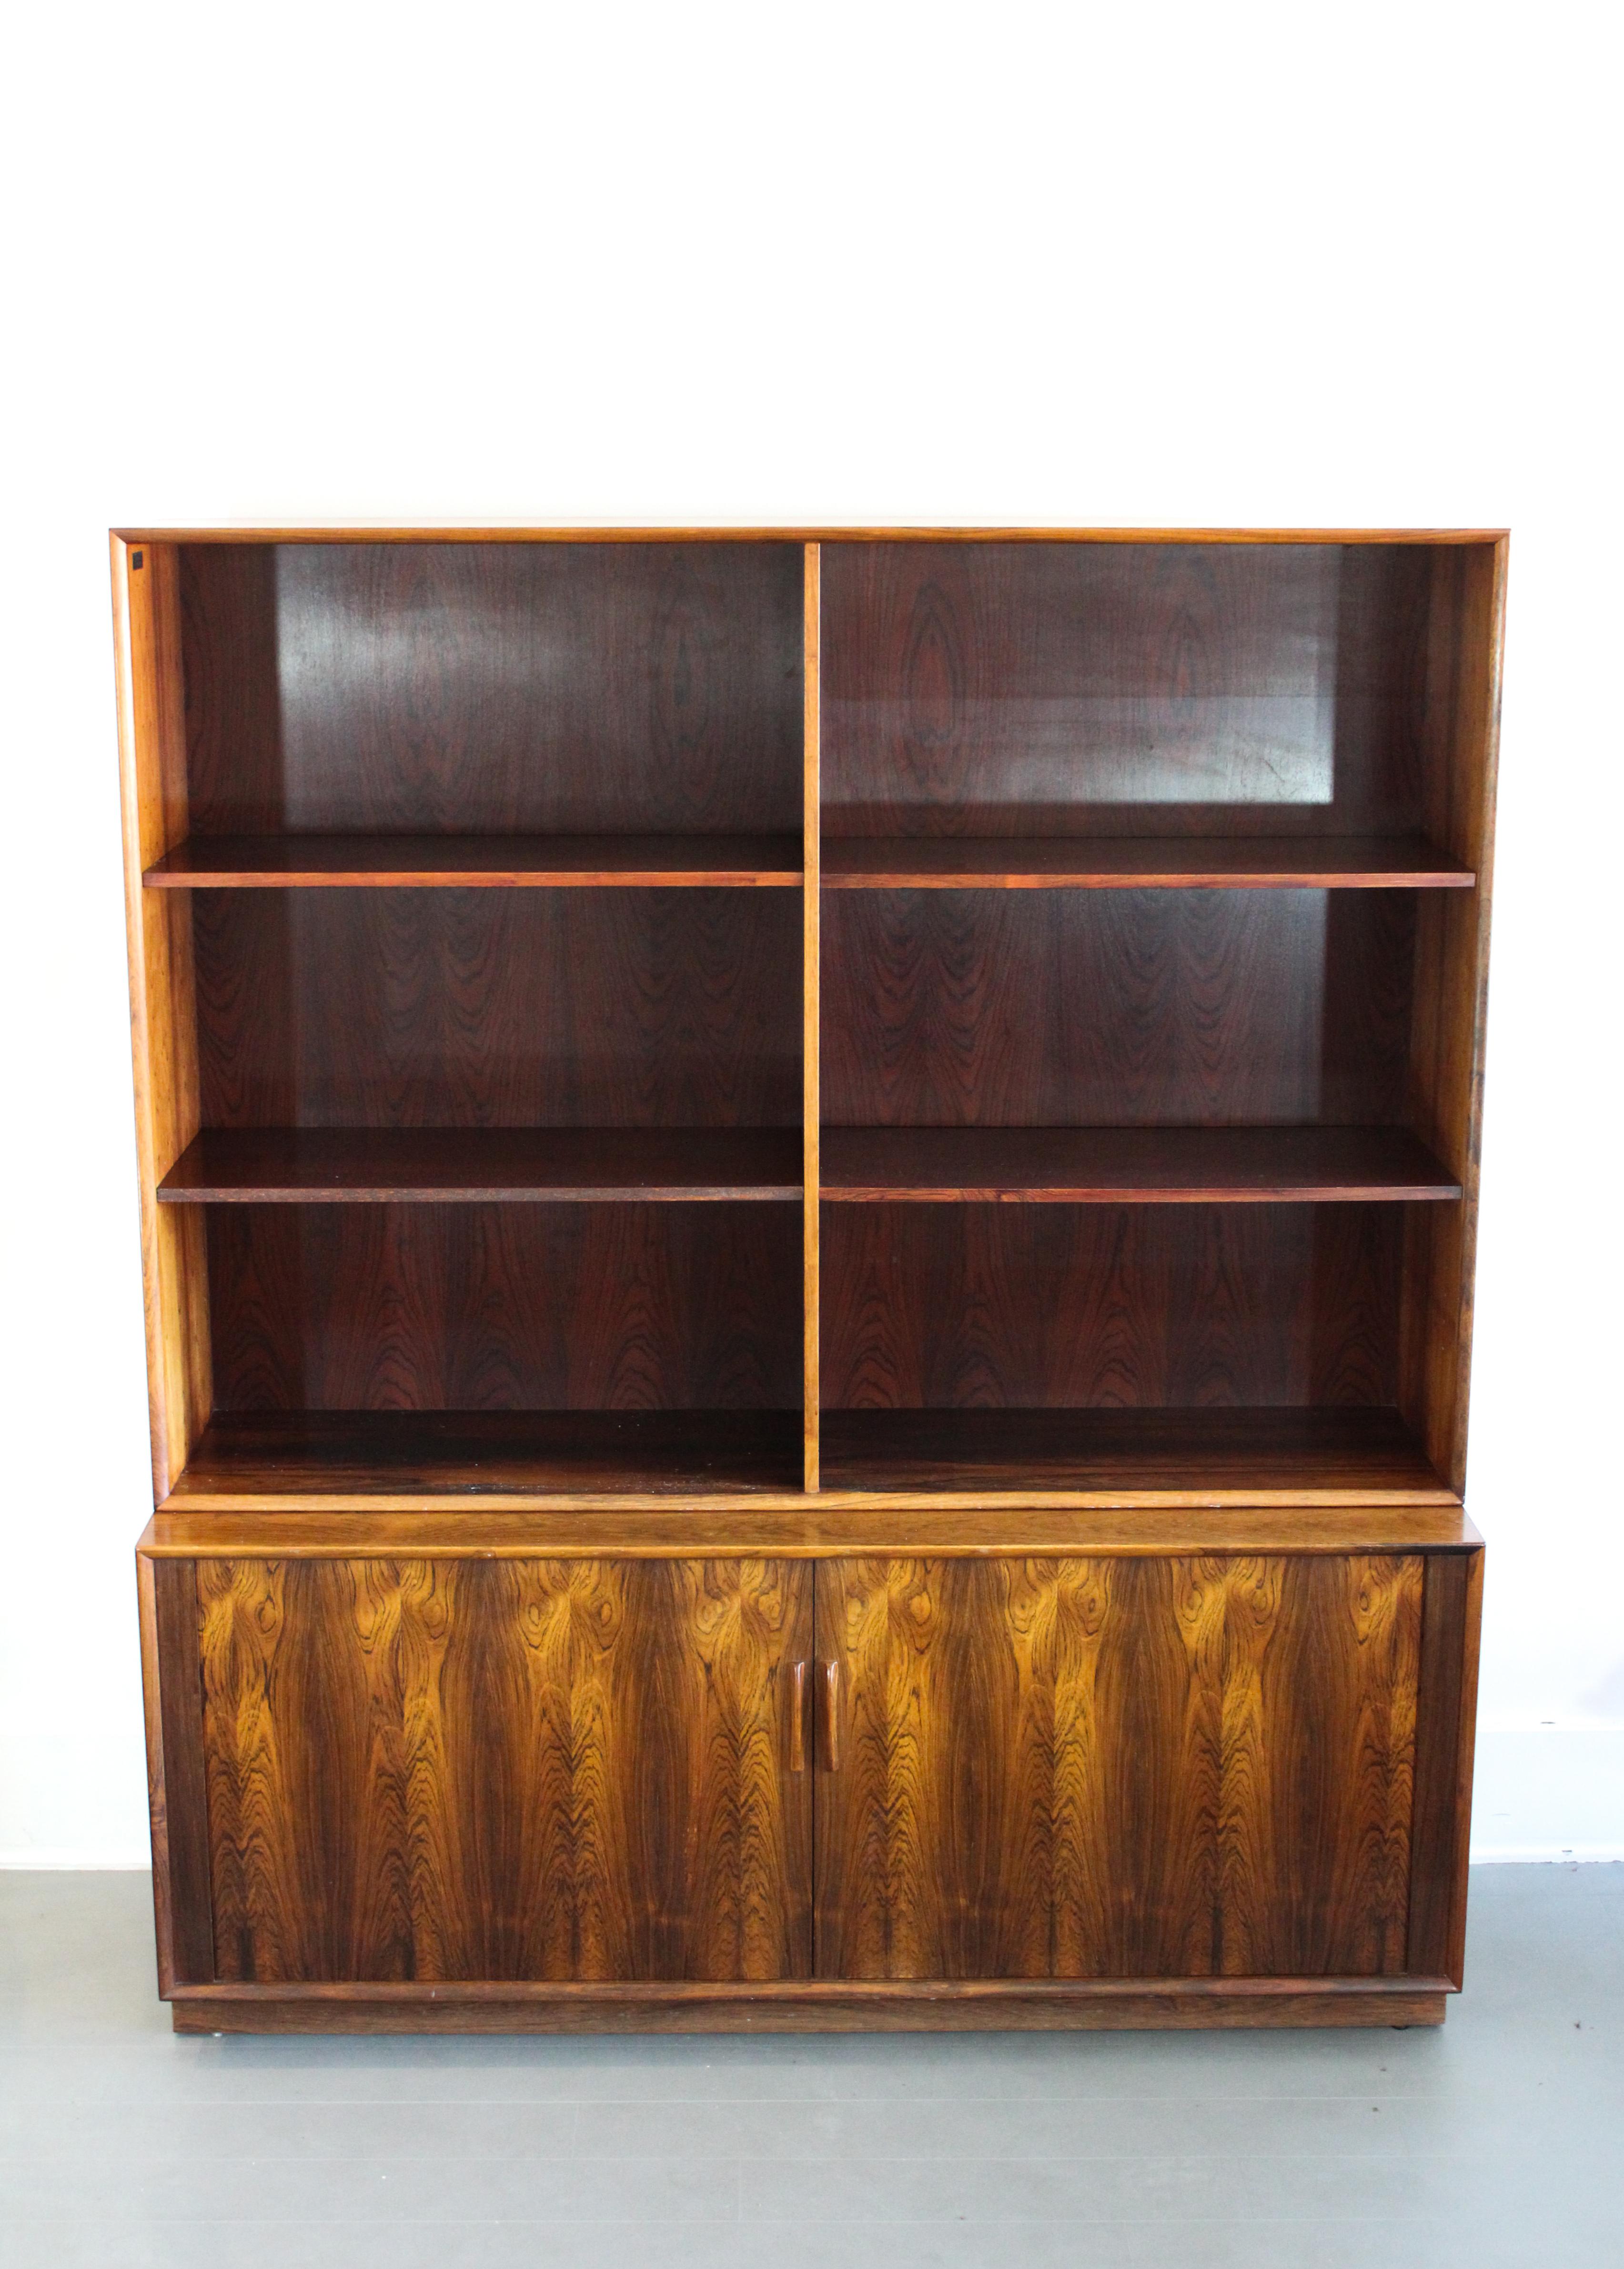 A rare bookcase designed by Arne Vodder for Danish manufacturer Sibast Møbler. This piece has a one lower cabinet with sliding tambour doors and a book case upper part, all made out of rosewood. It is in good vintage condition with fully functional